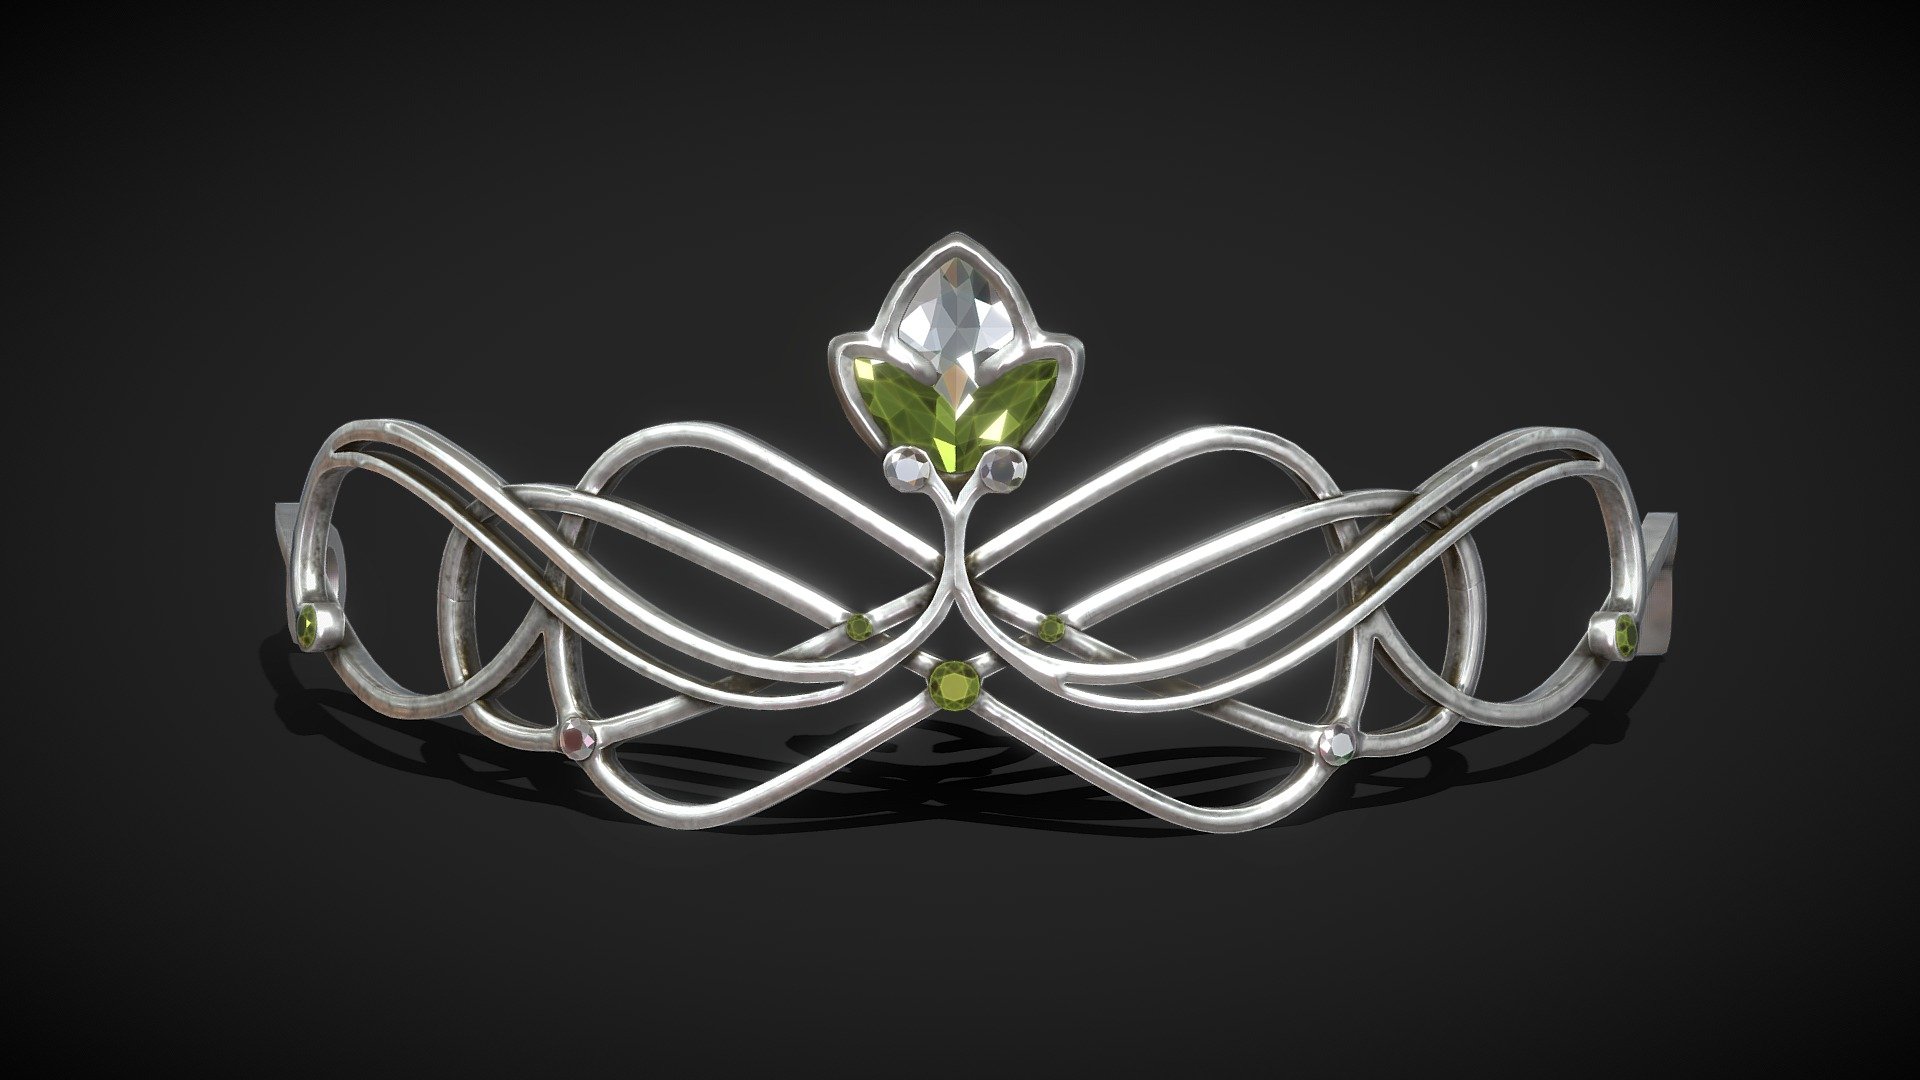 Tiara Diadem Crown / Elven Crown

Triangles: 6k
Vertices: 3k

4096x4096 PNG texture

Textures include:




Base Color 

Normal

Roughness

Opacity 

Emissive

AO

Crowns Collection &lt;&lt; - Tiara Diadem Crown / Elven Crown - Buy Royalty Free 3D model by Karolina Renkiewicz (@KarolinaRenkiewicz) 3d model